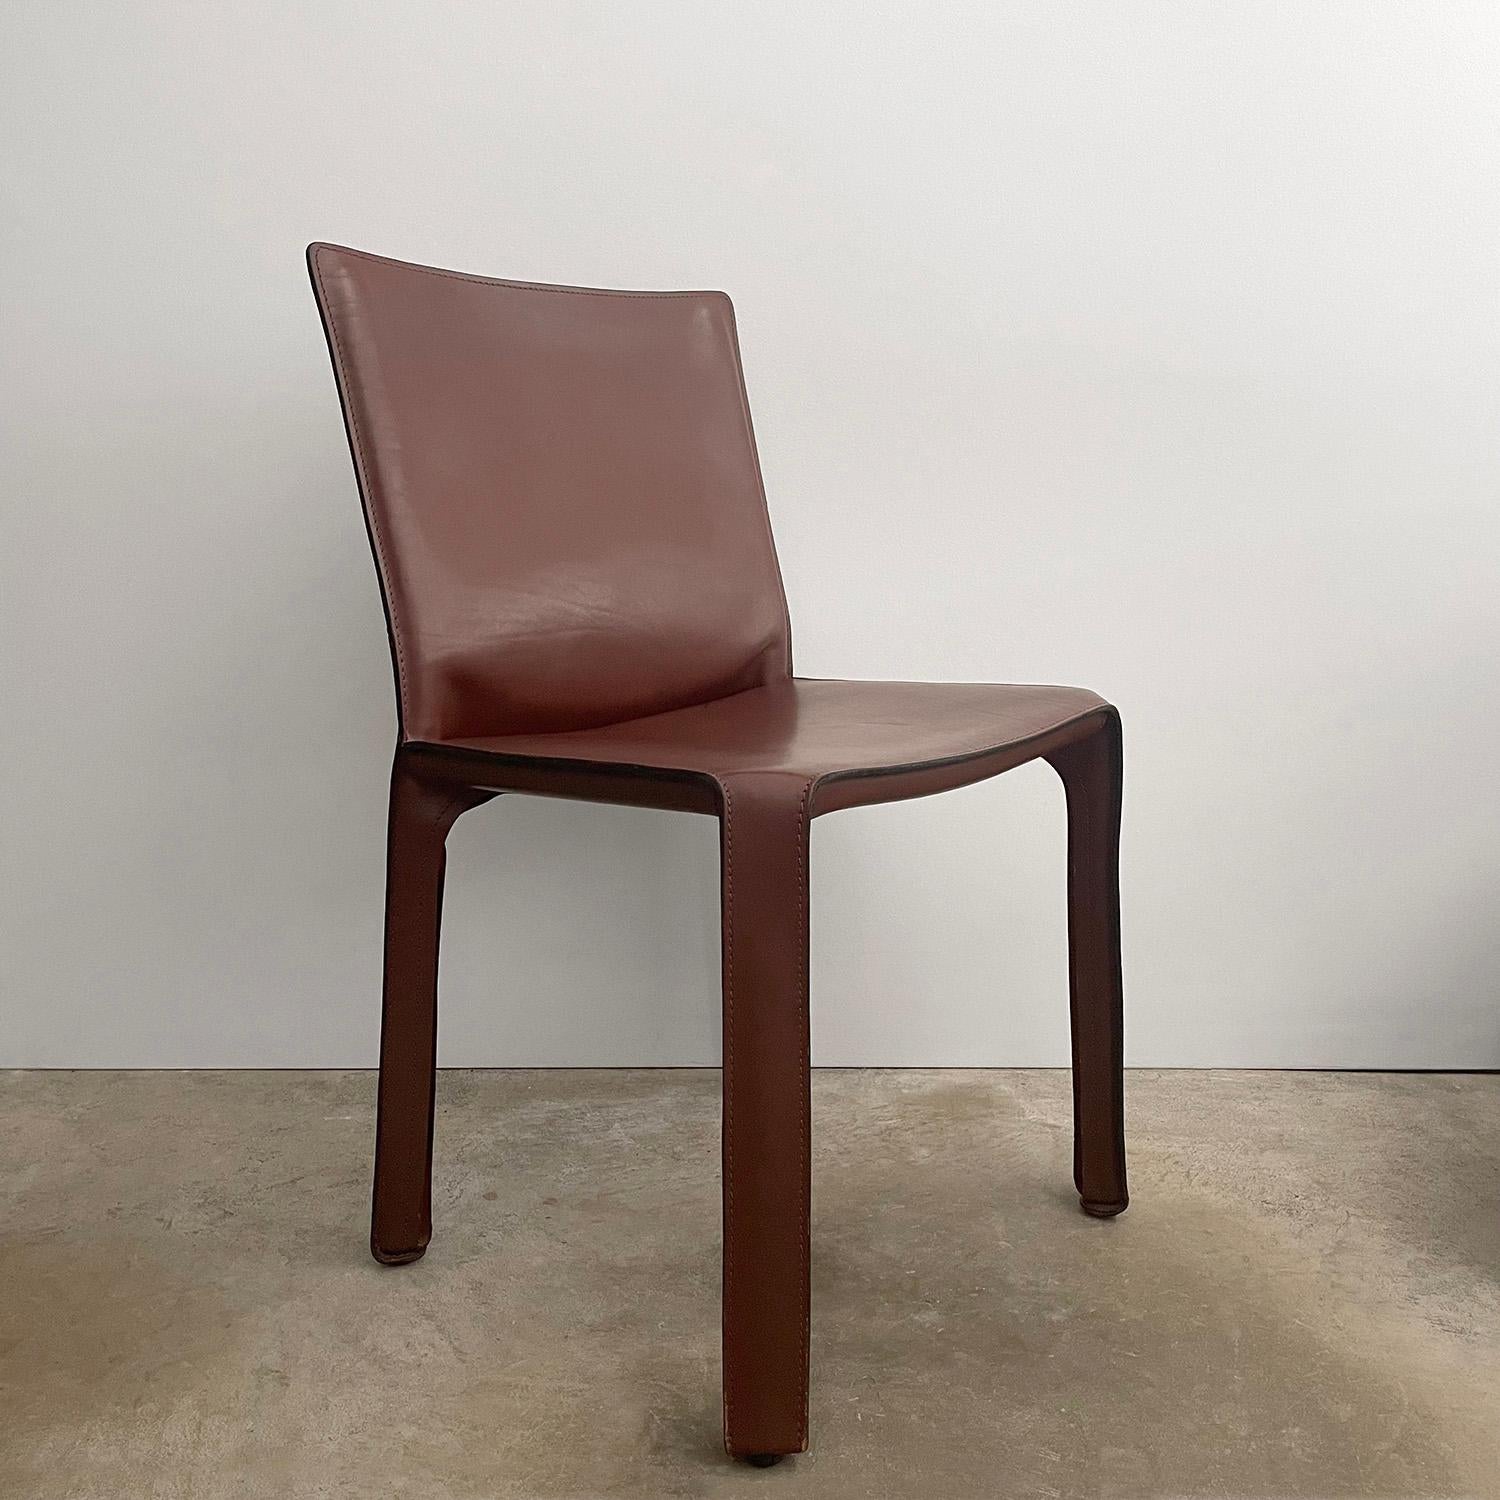 Mario Bellini cab chair manufactured by Cassina
Italy, circa 1970’s
Buttery soft Oxblood leather
Light surface markings on the seat
Perfectly worn in from years of use
Patina from age and use
Newly reconditioned
Marked identification
